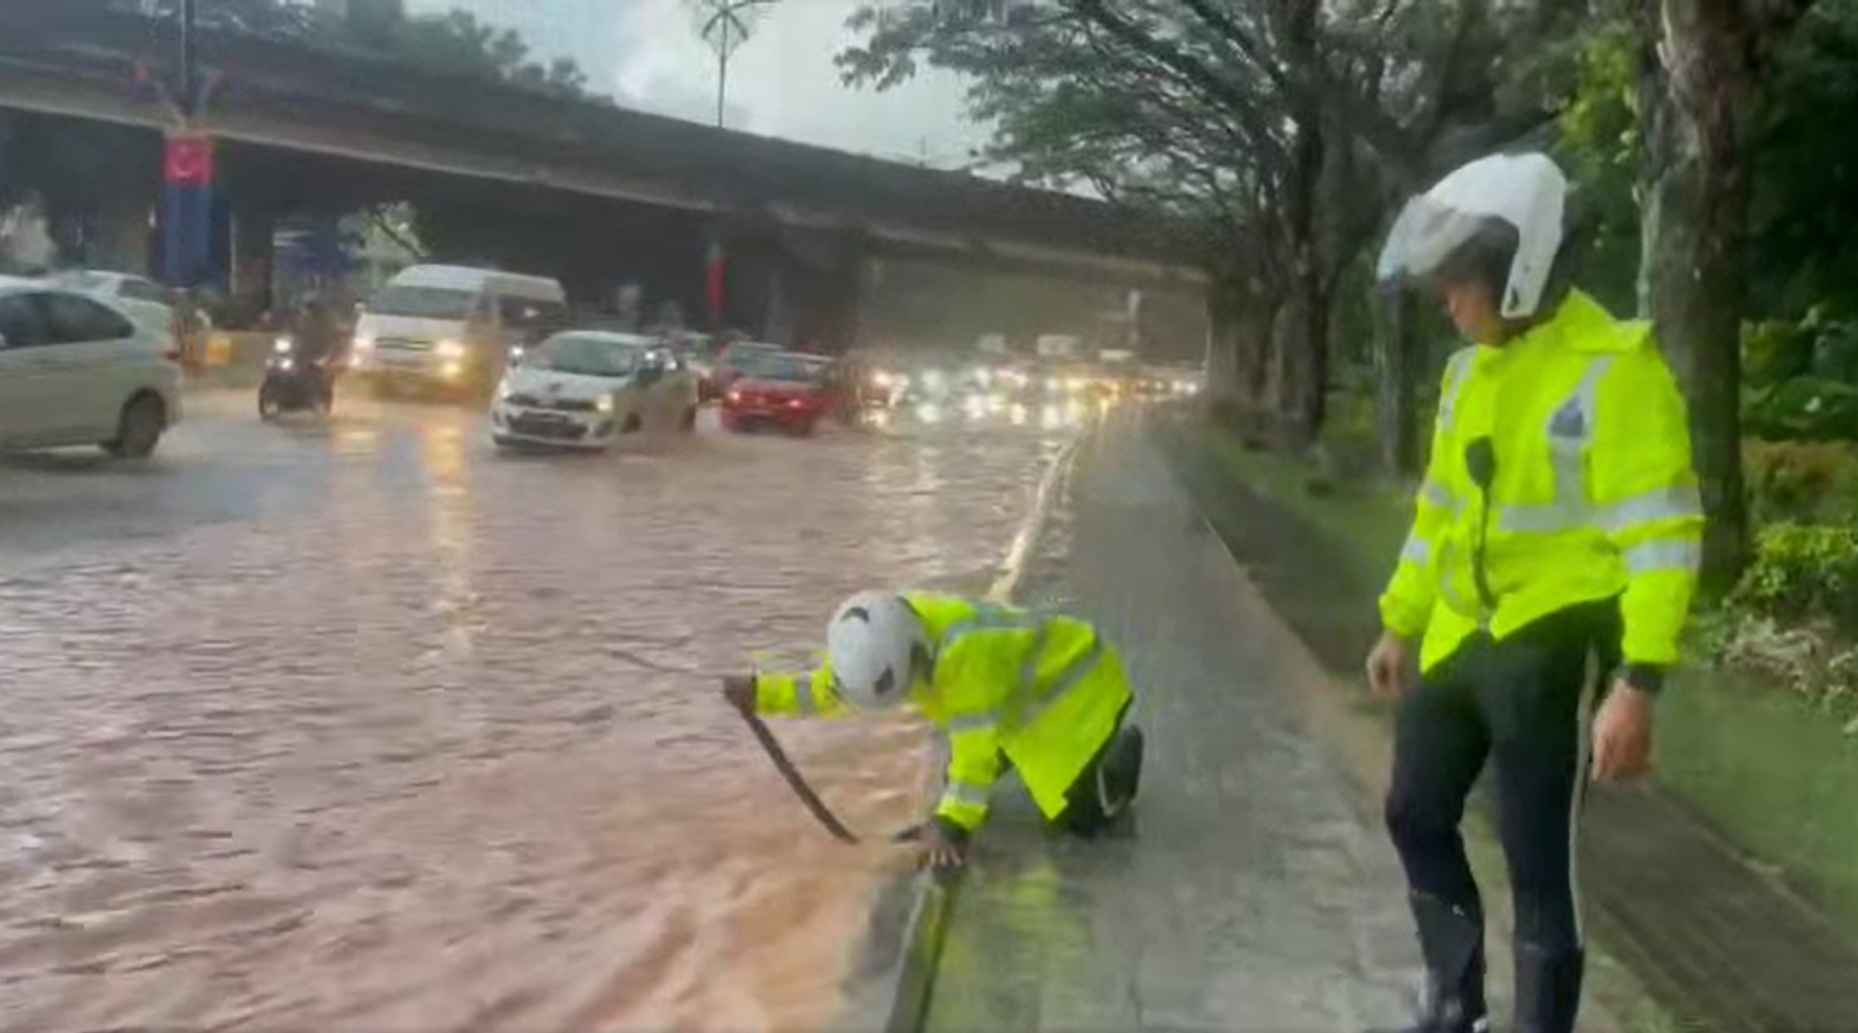 Traffic officers fixing clogged drain in jb with wooden stick